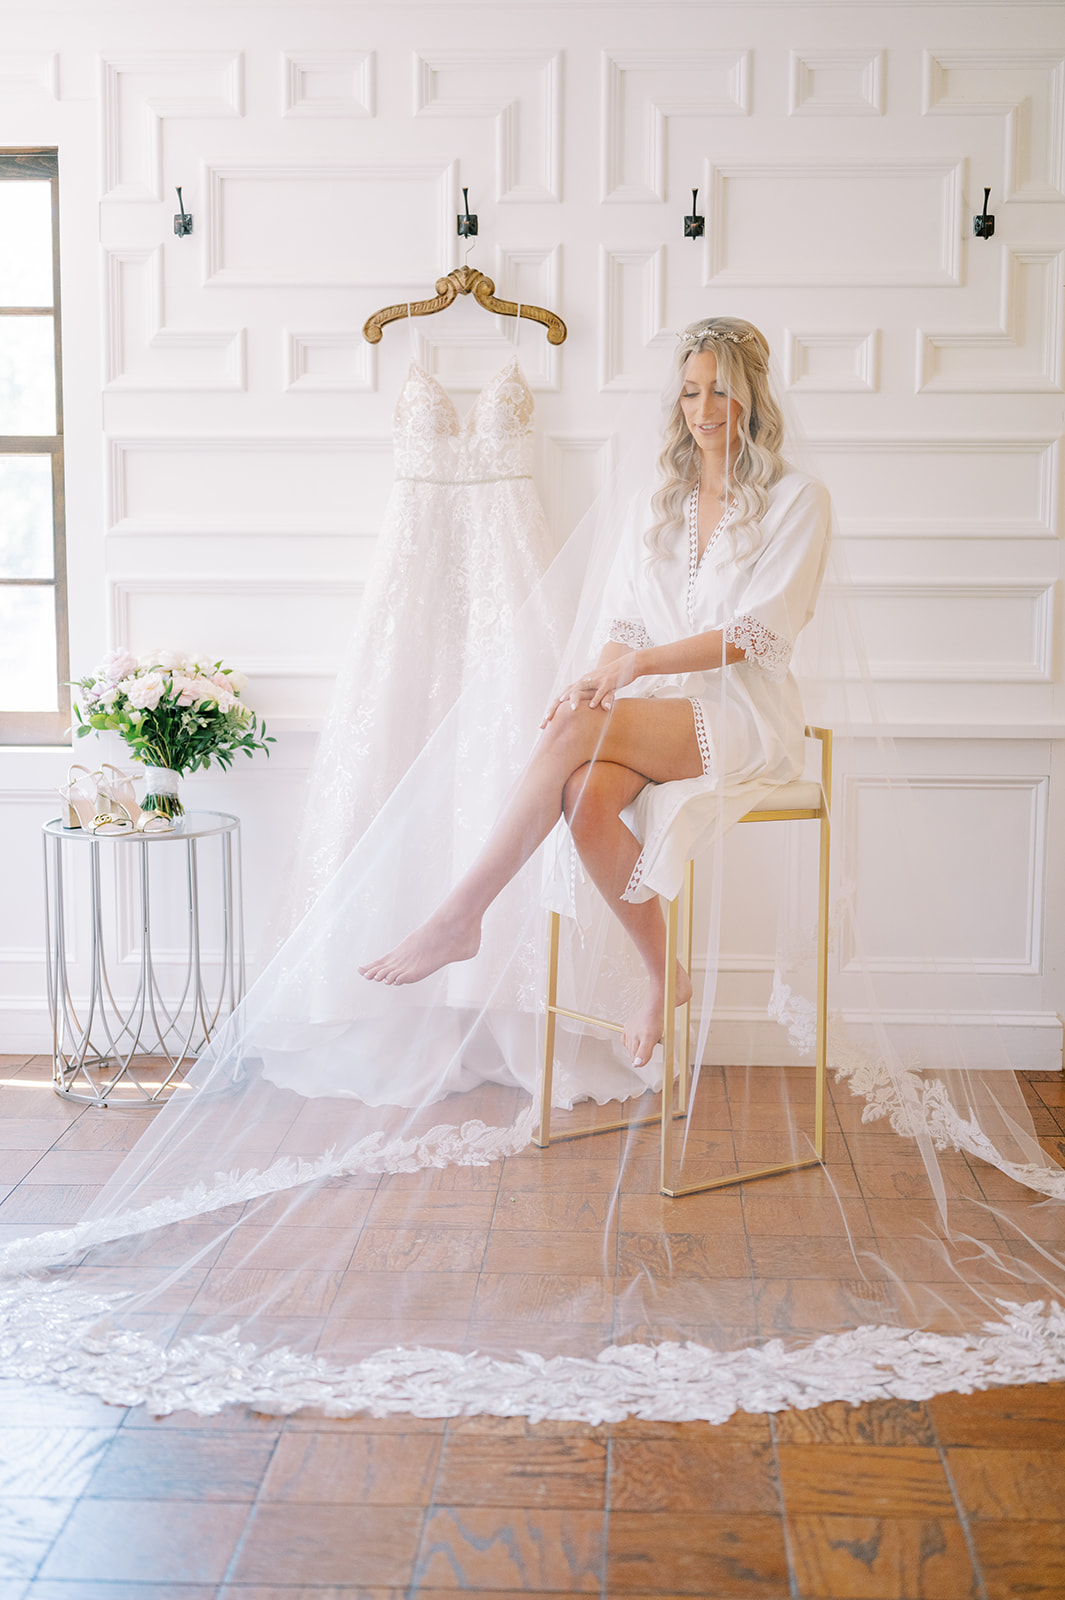 sitting bride prep photo with dress, vail, flowers, shoes in bridal suite in hotel du village 